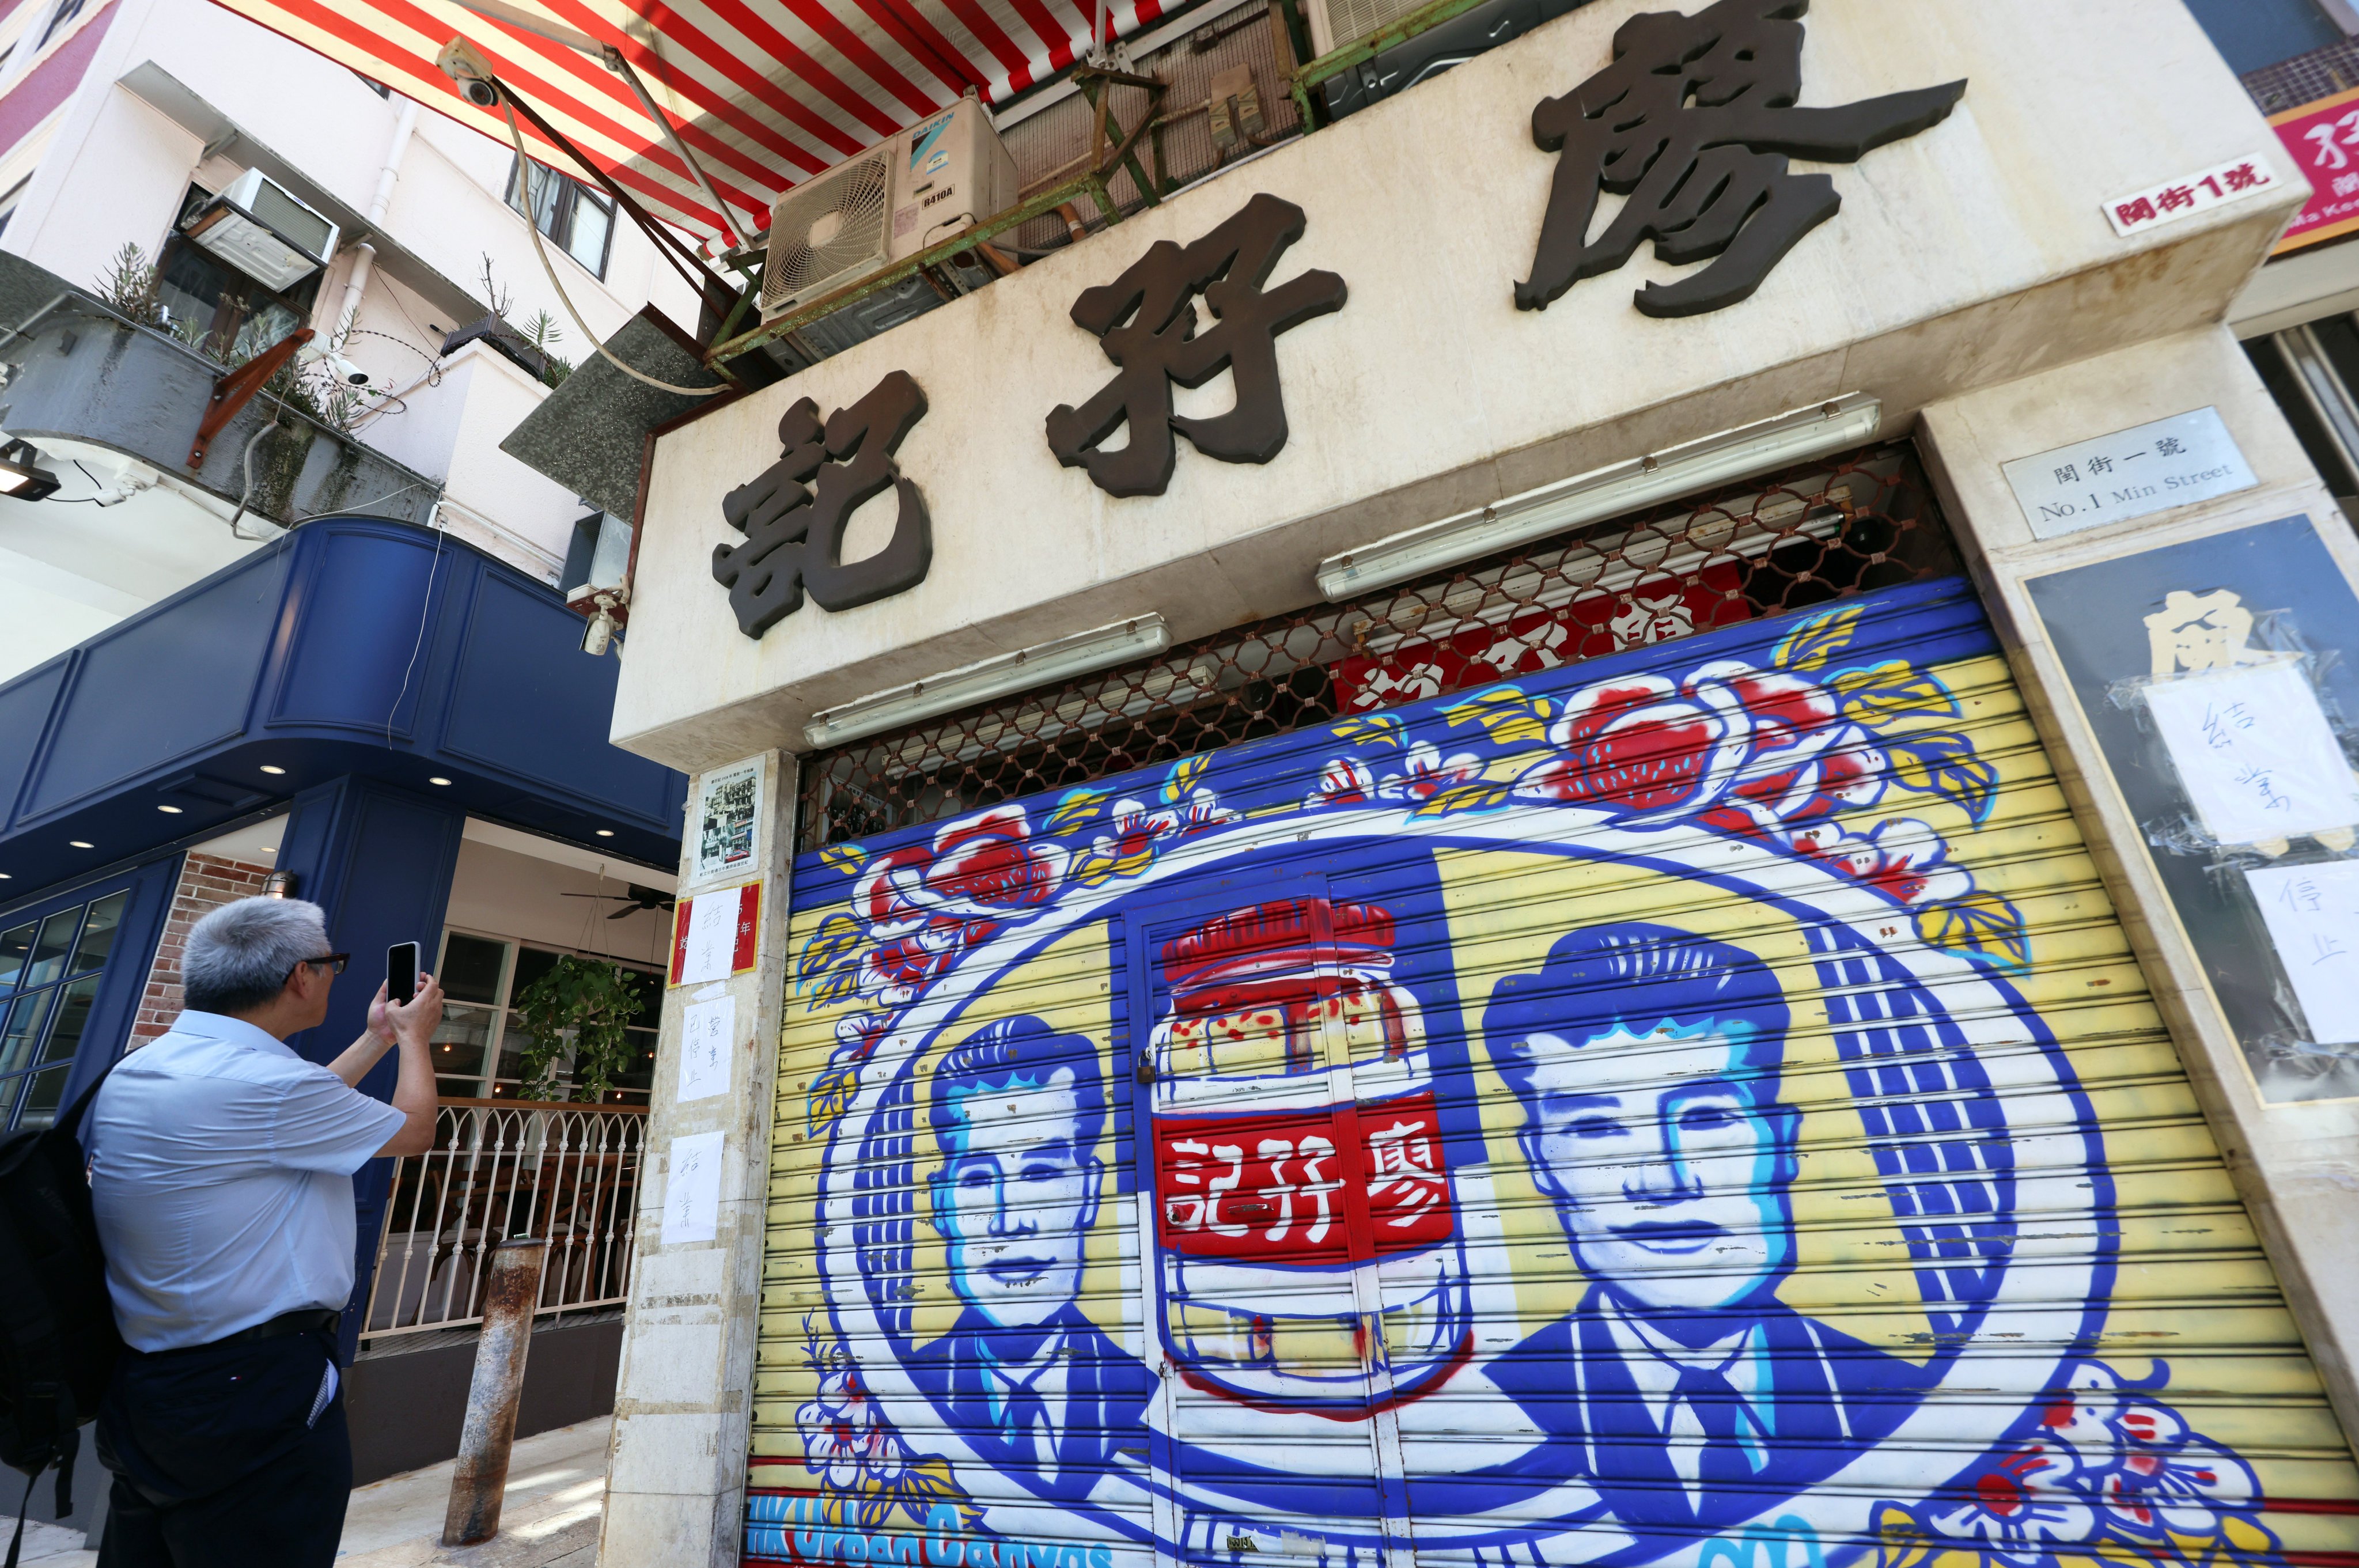 Liu Ma Kee has closed after more than a century of business following revelations it imported its fermented tofu from mainland China and resold it with additives introduced under poor hygiene conditions. Photo: Jelly Tse